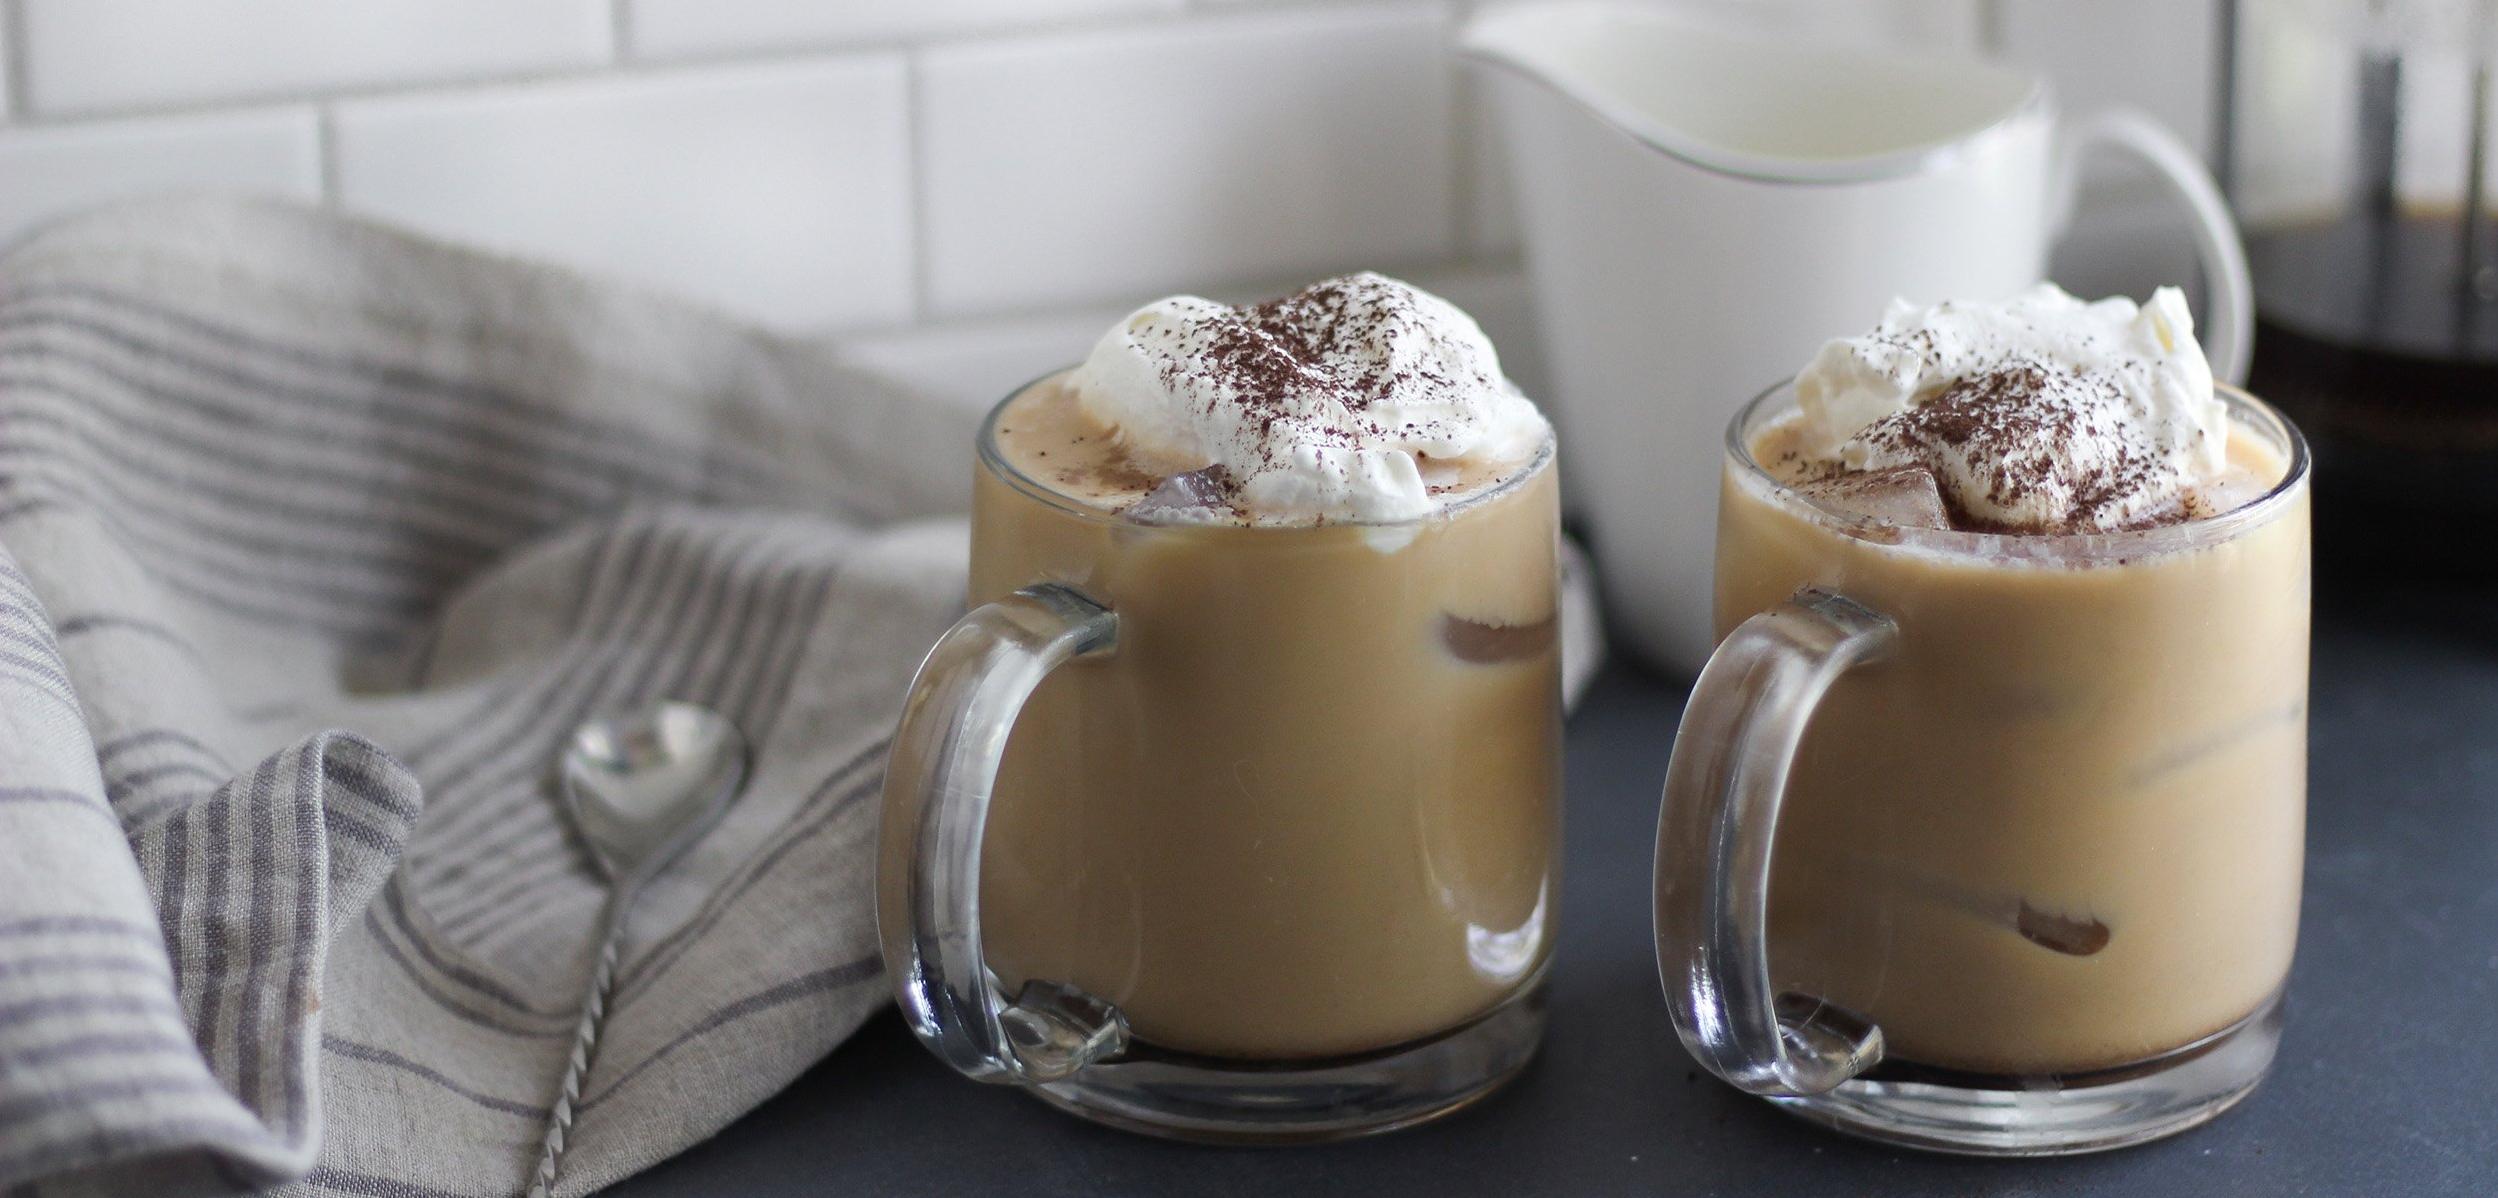  Give your coffee a little something extra with a splash of Irish cream.